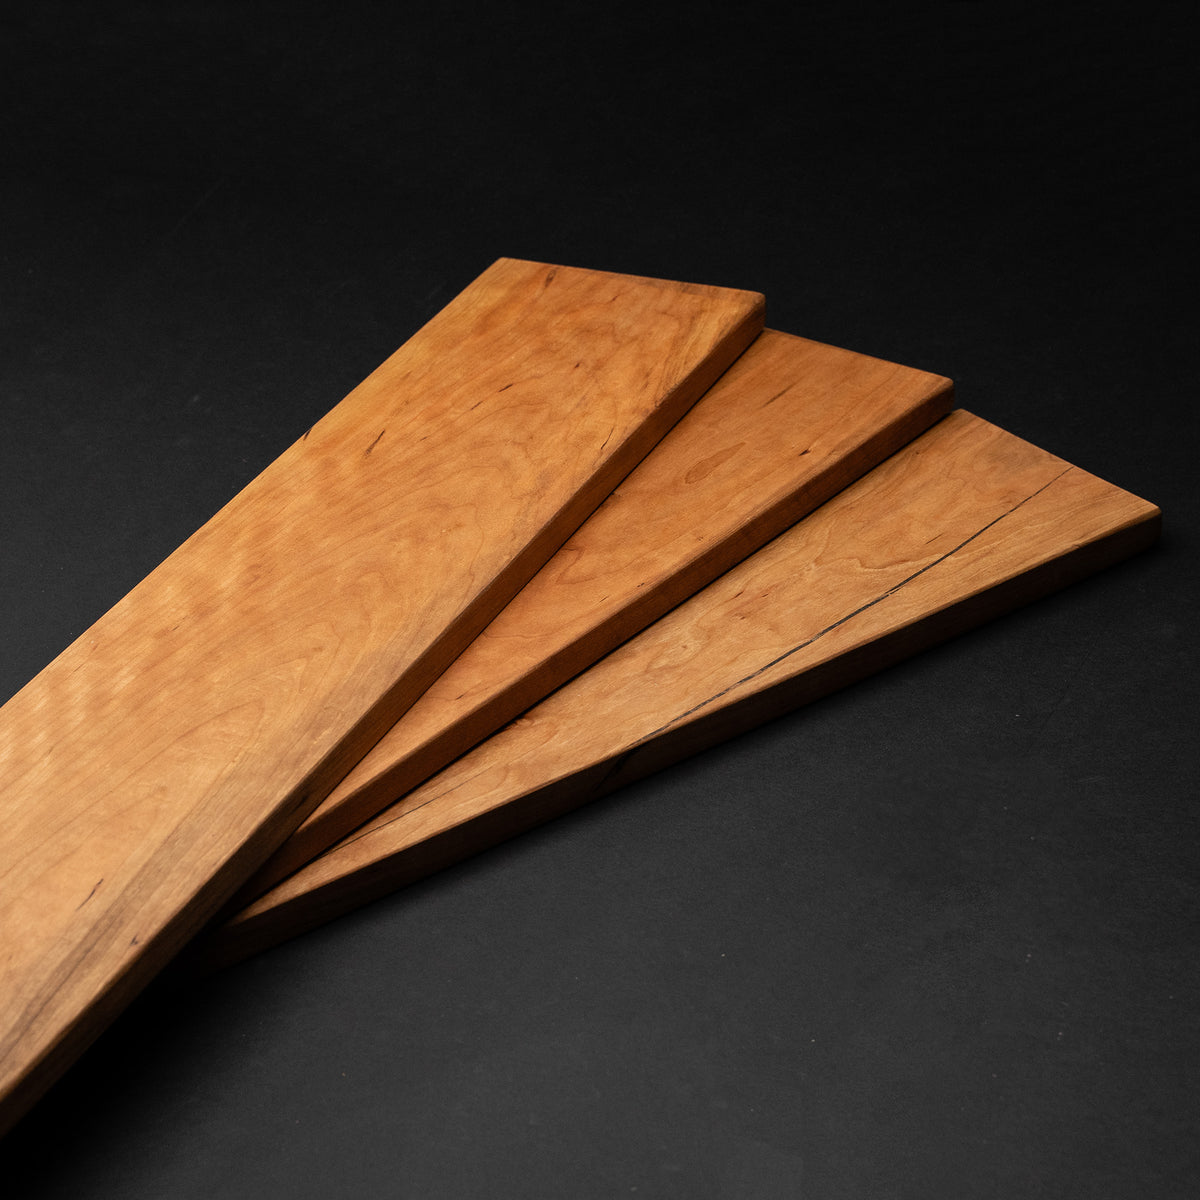 4/4 1” Cherry Boards - Kiln Dried Dimensional Lumber - Cut to Size Cherry Board